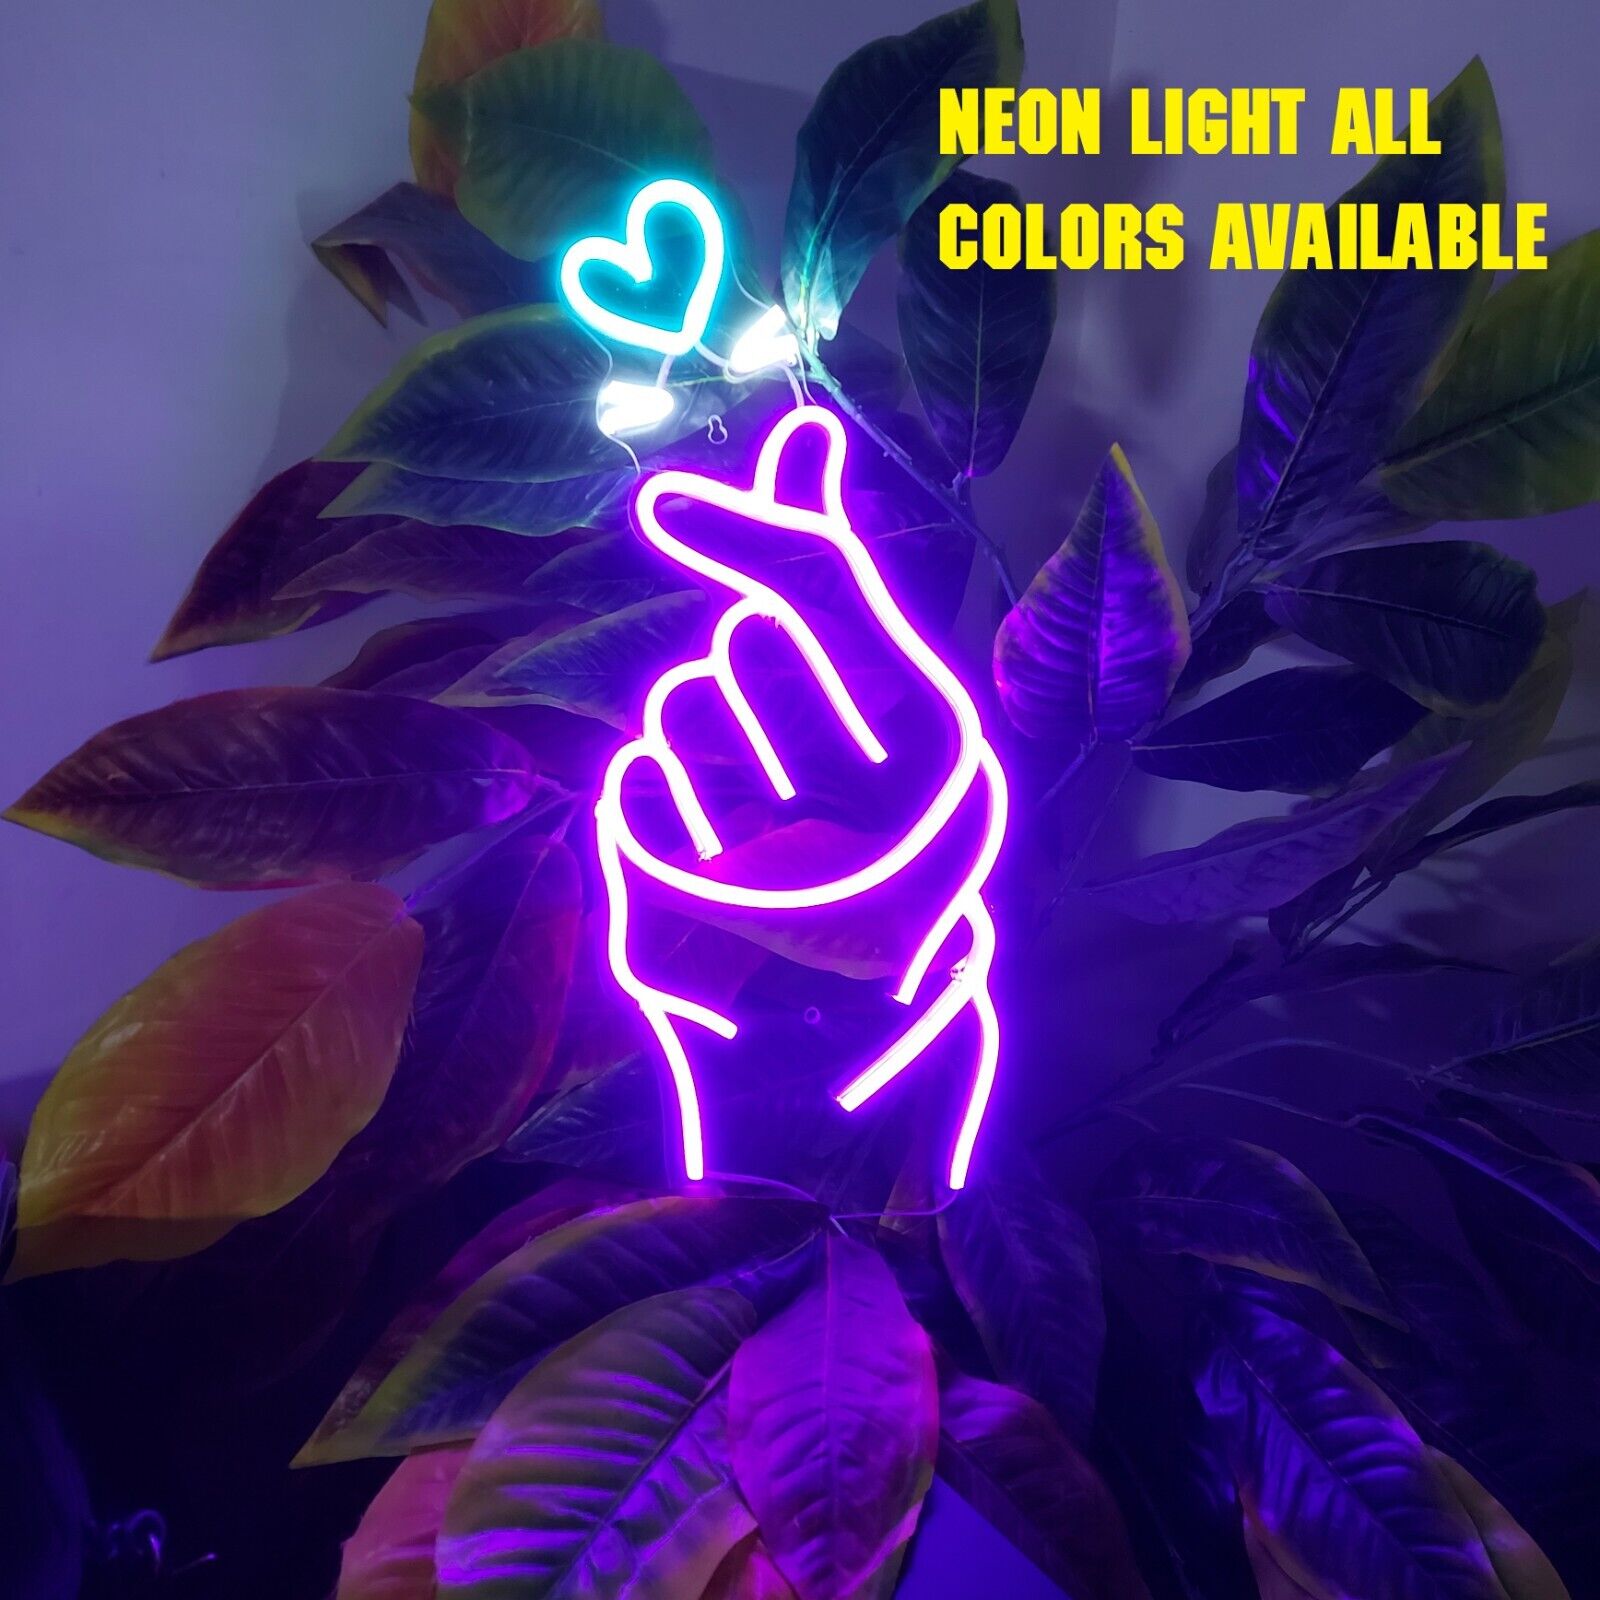 Neon light Sign best item for gifting and decoration, hand with heart shape